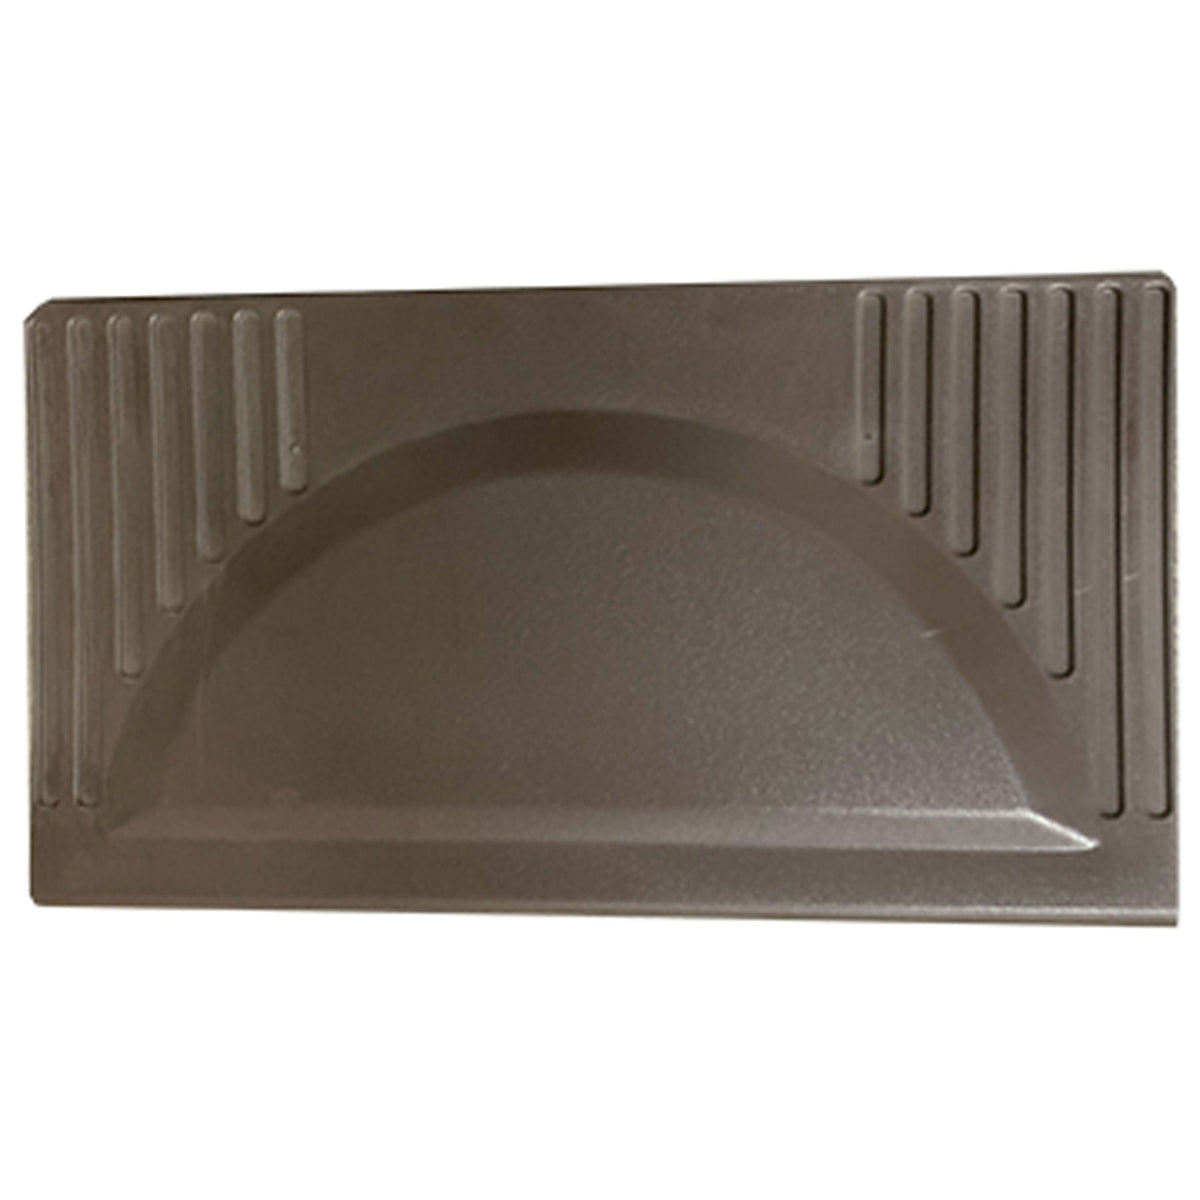 WFCO Qualifies for Free Shipping WFCO Door Assembly for WF-8712-P & WF-8725-P Power Centers 7.25" x 11.75" Brown #WF-8725-PDA